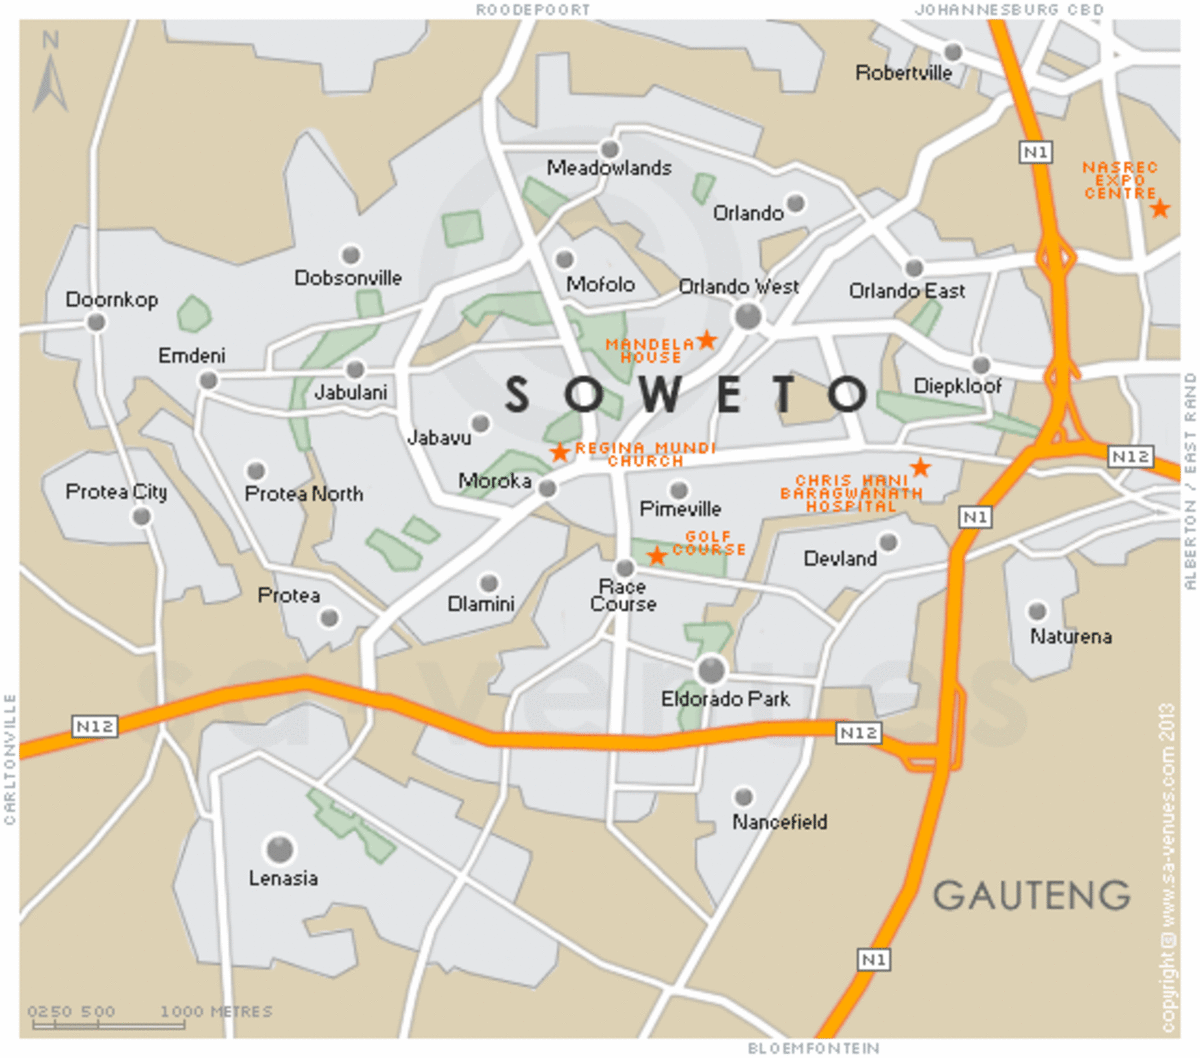 South African Apartheid: Soweto (South Western Eastern Townships) - So Where To?